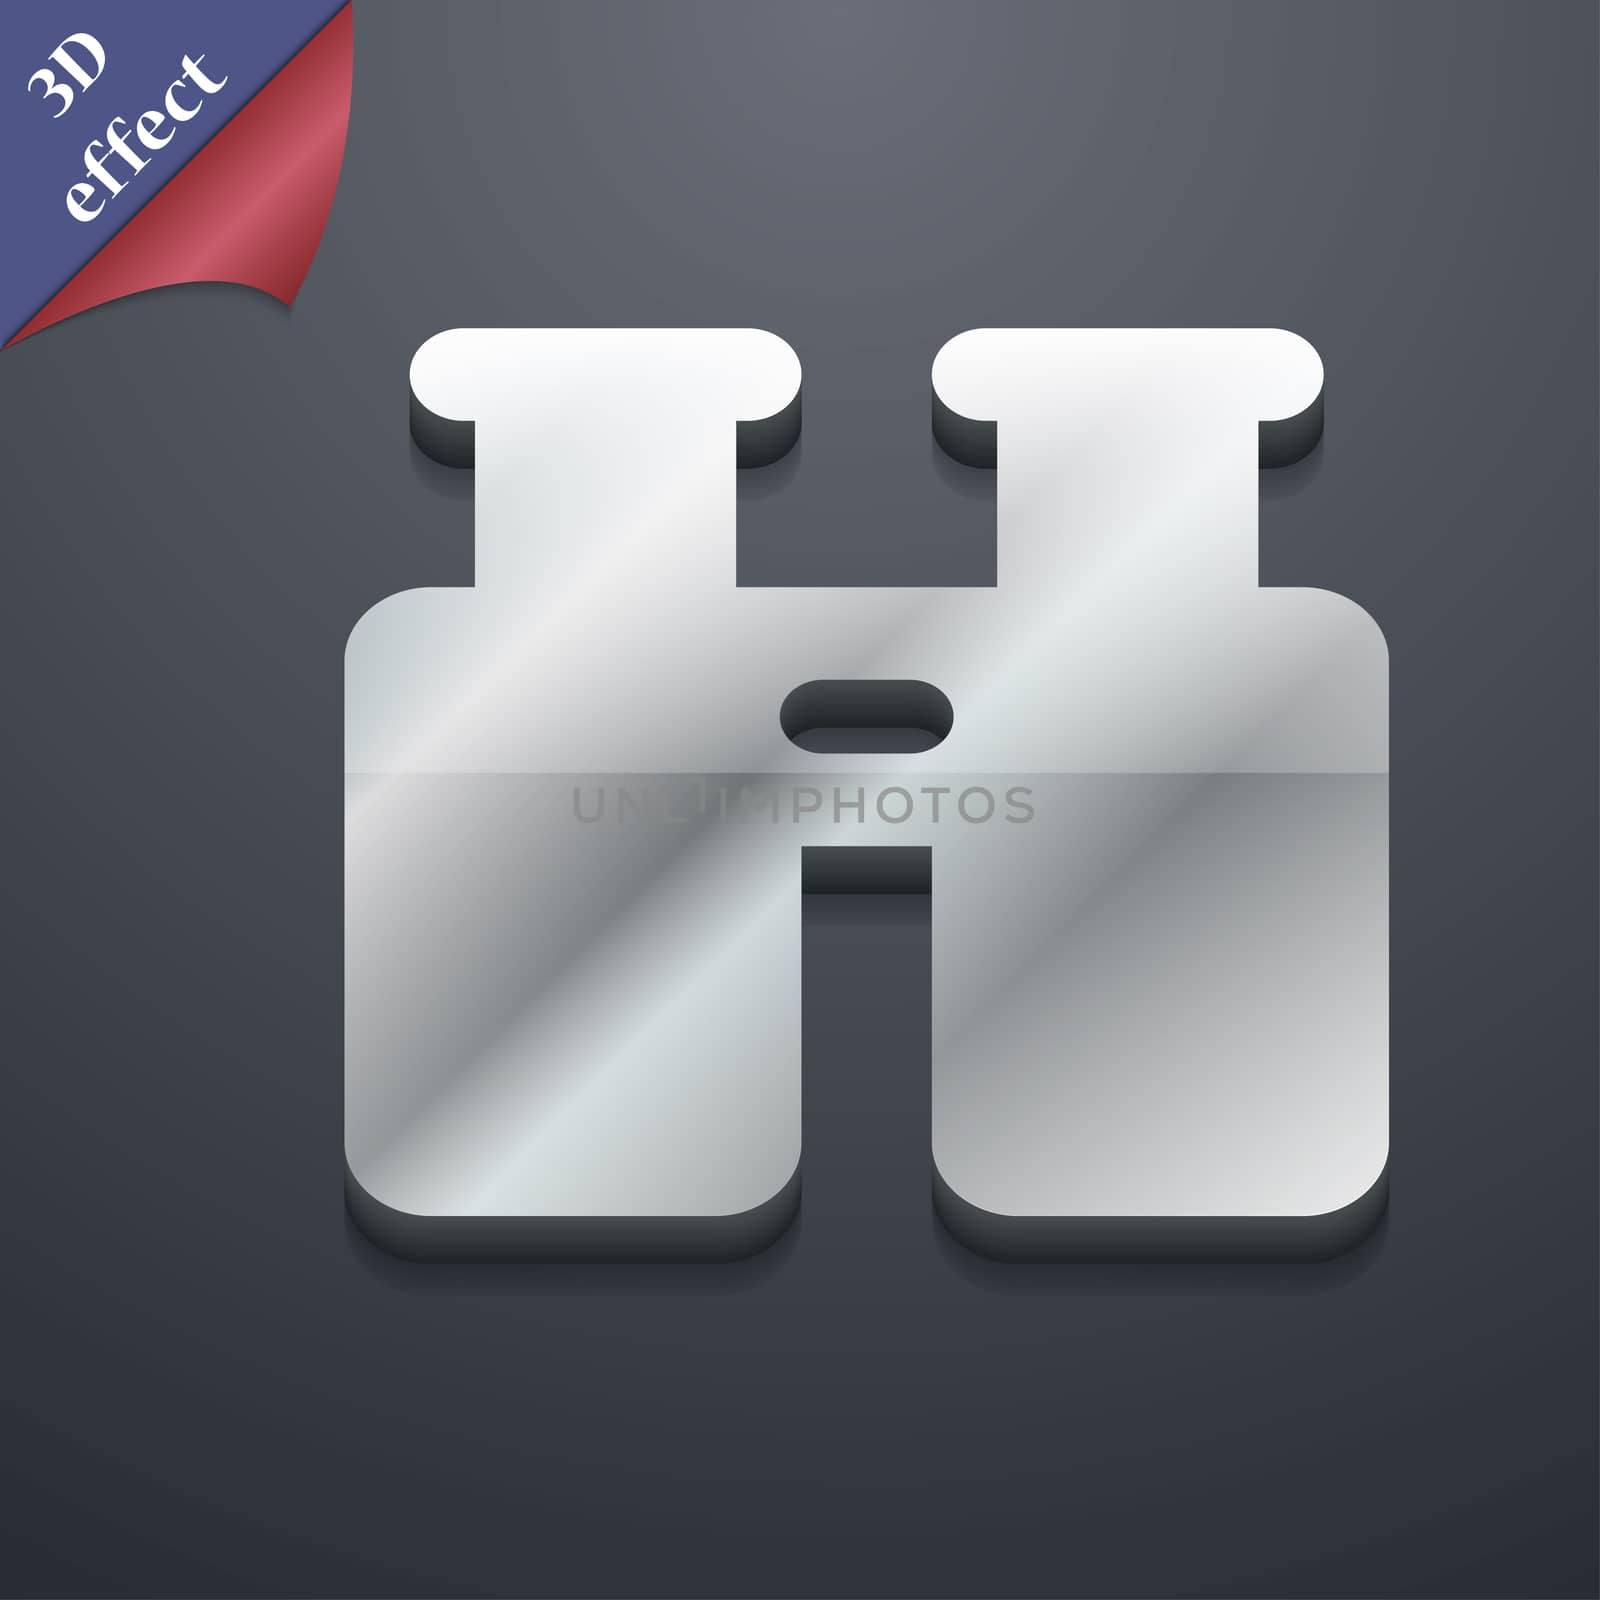 Binocular, Search, Find information icon symbol. 3D style. Trendy, modern design with space for your text illustration. Rastrized copy